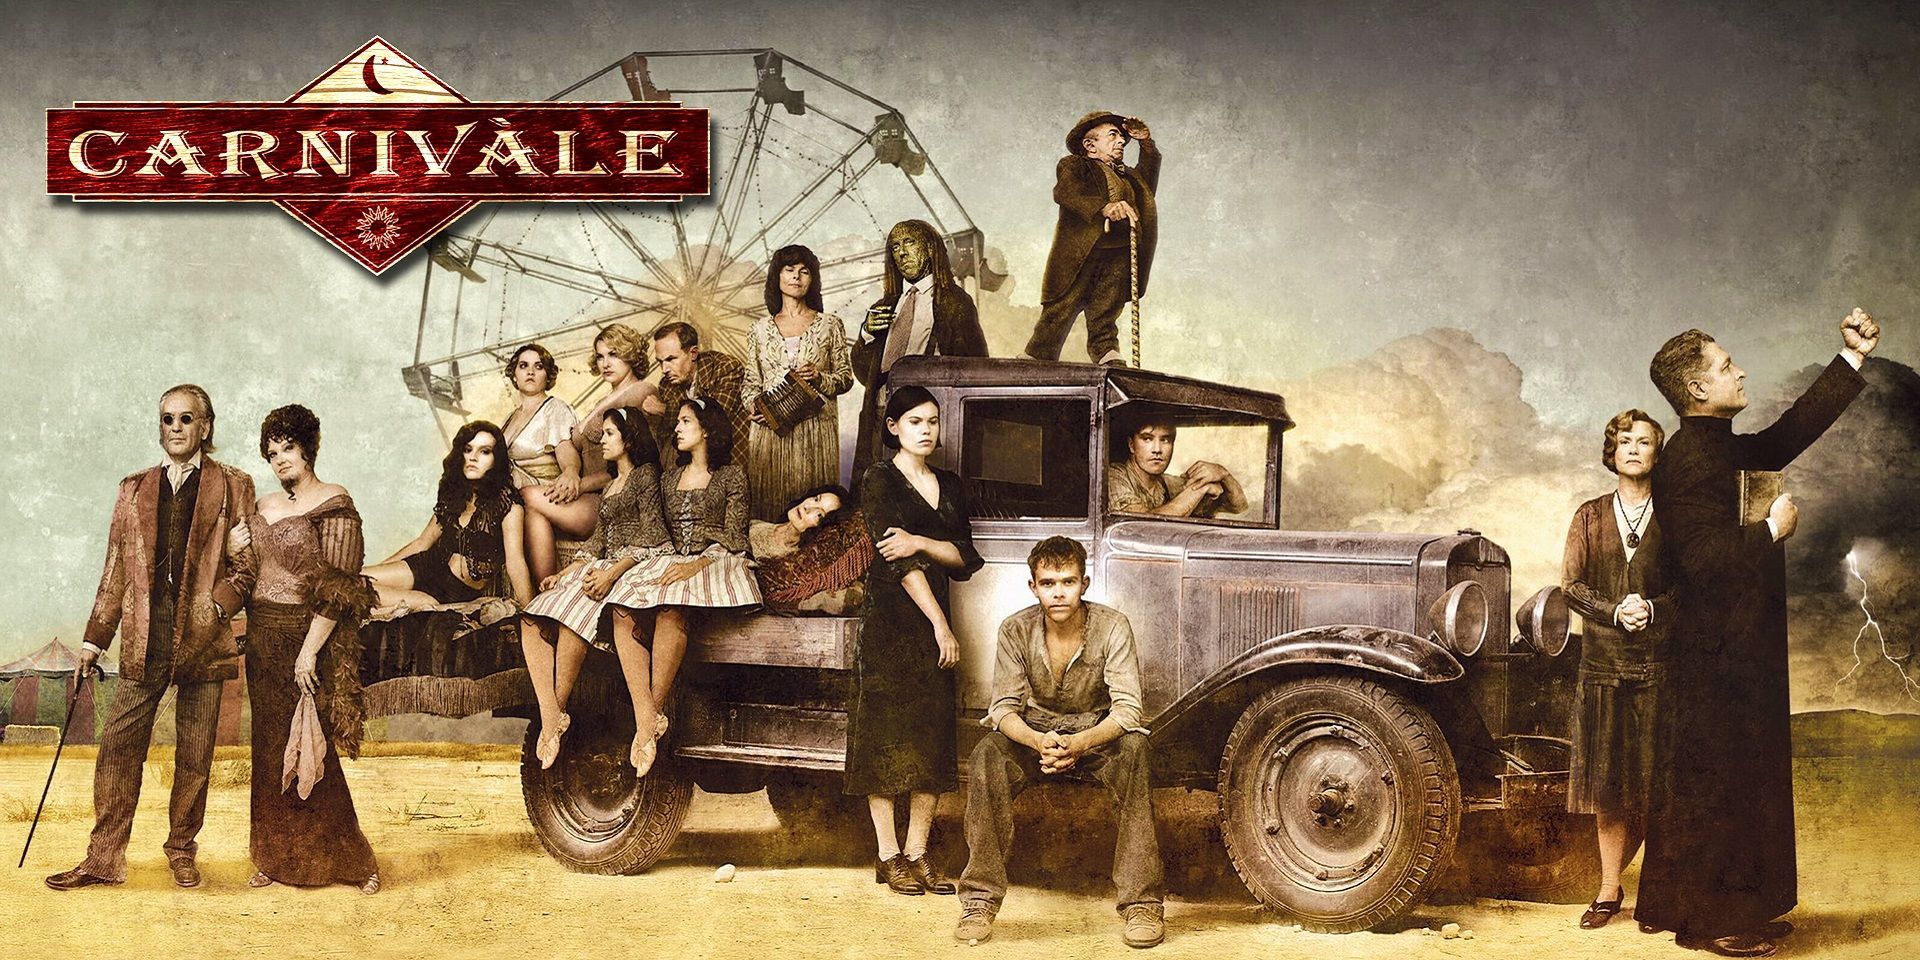 The cast of Carnivale HBO